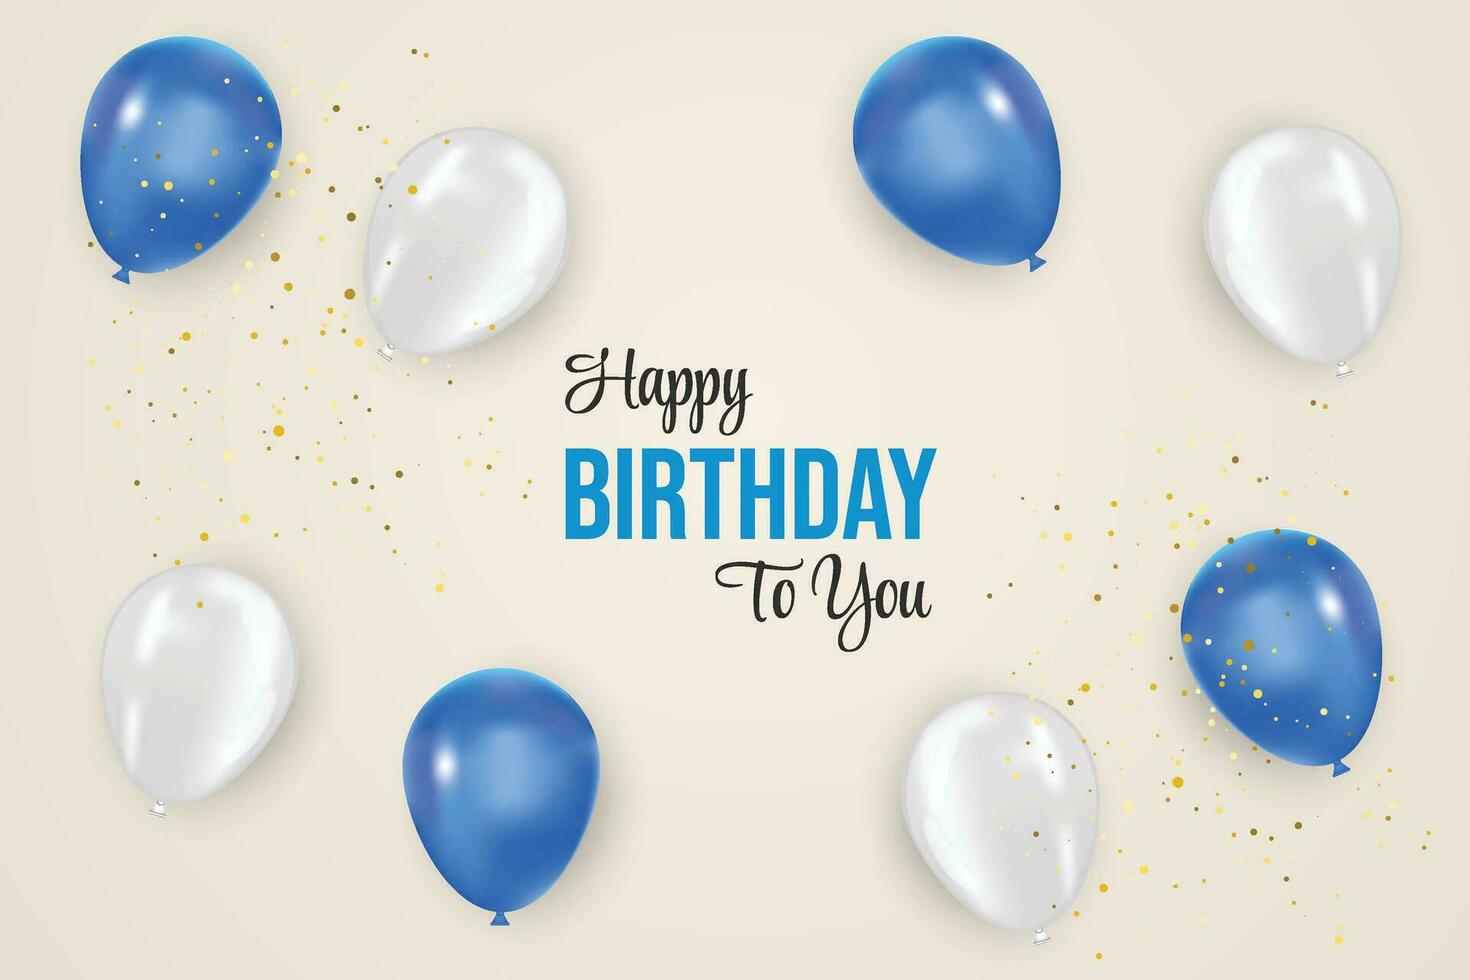 Birthday  banner design Happy birthday greeting text with elegant white and blue  balloon for birth day celebration messages card design vector